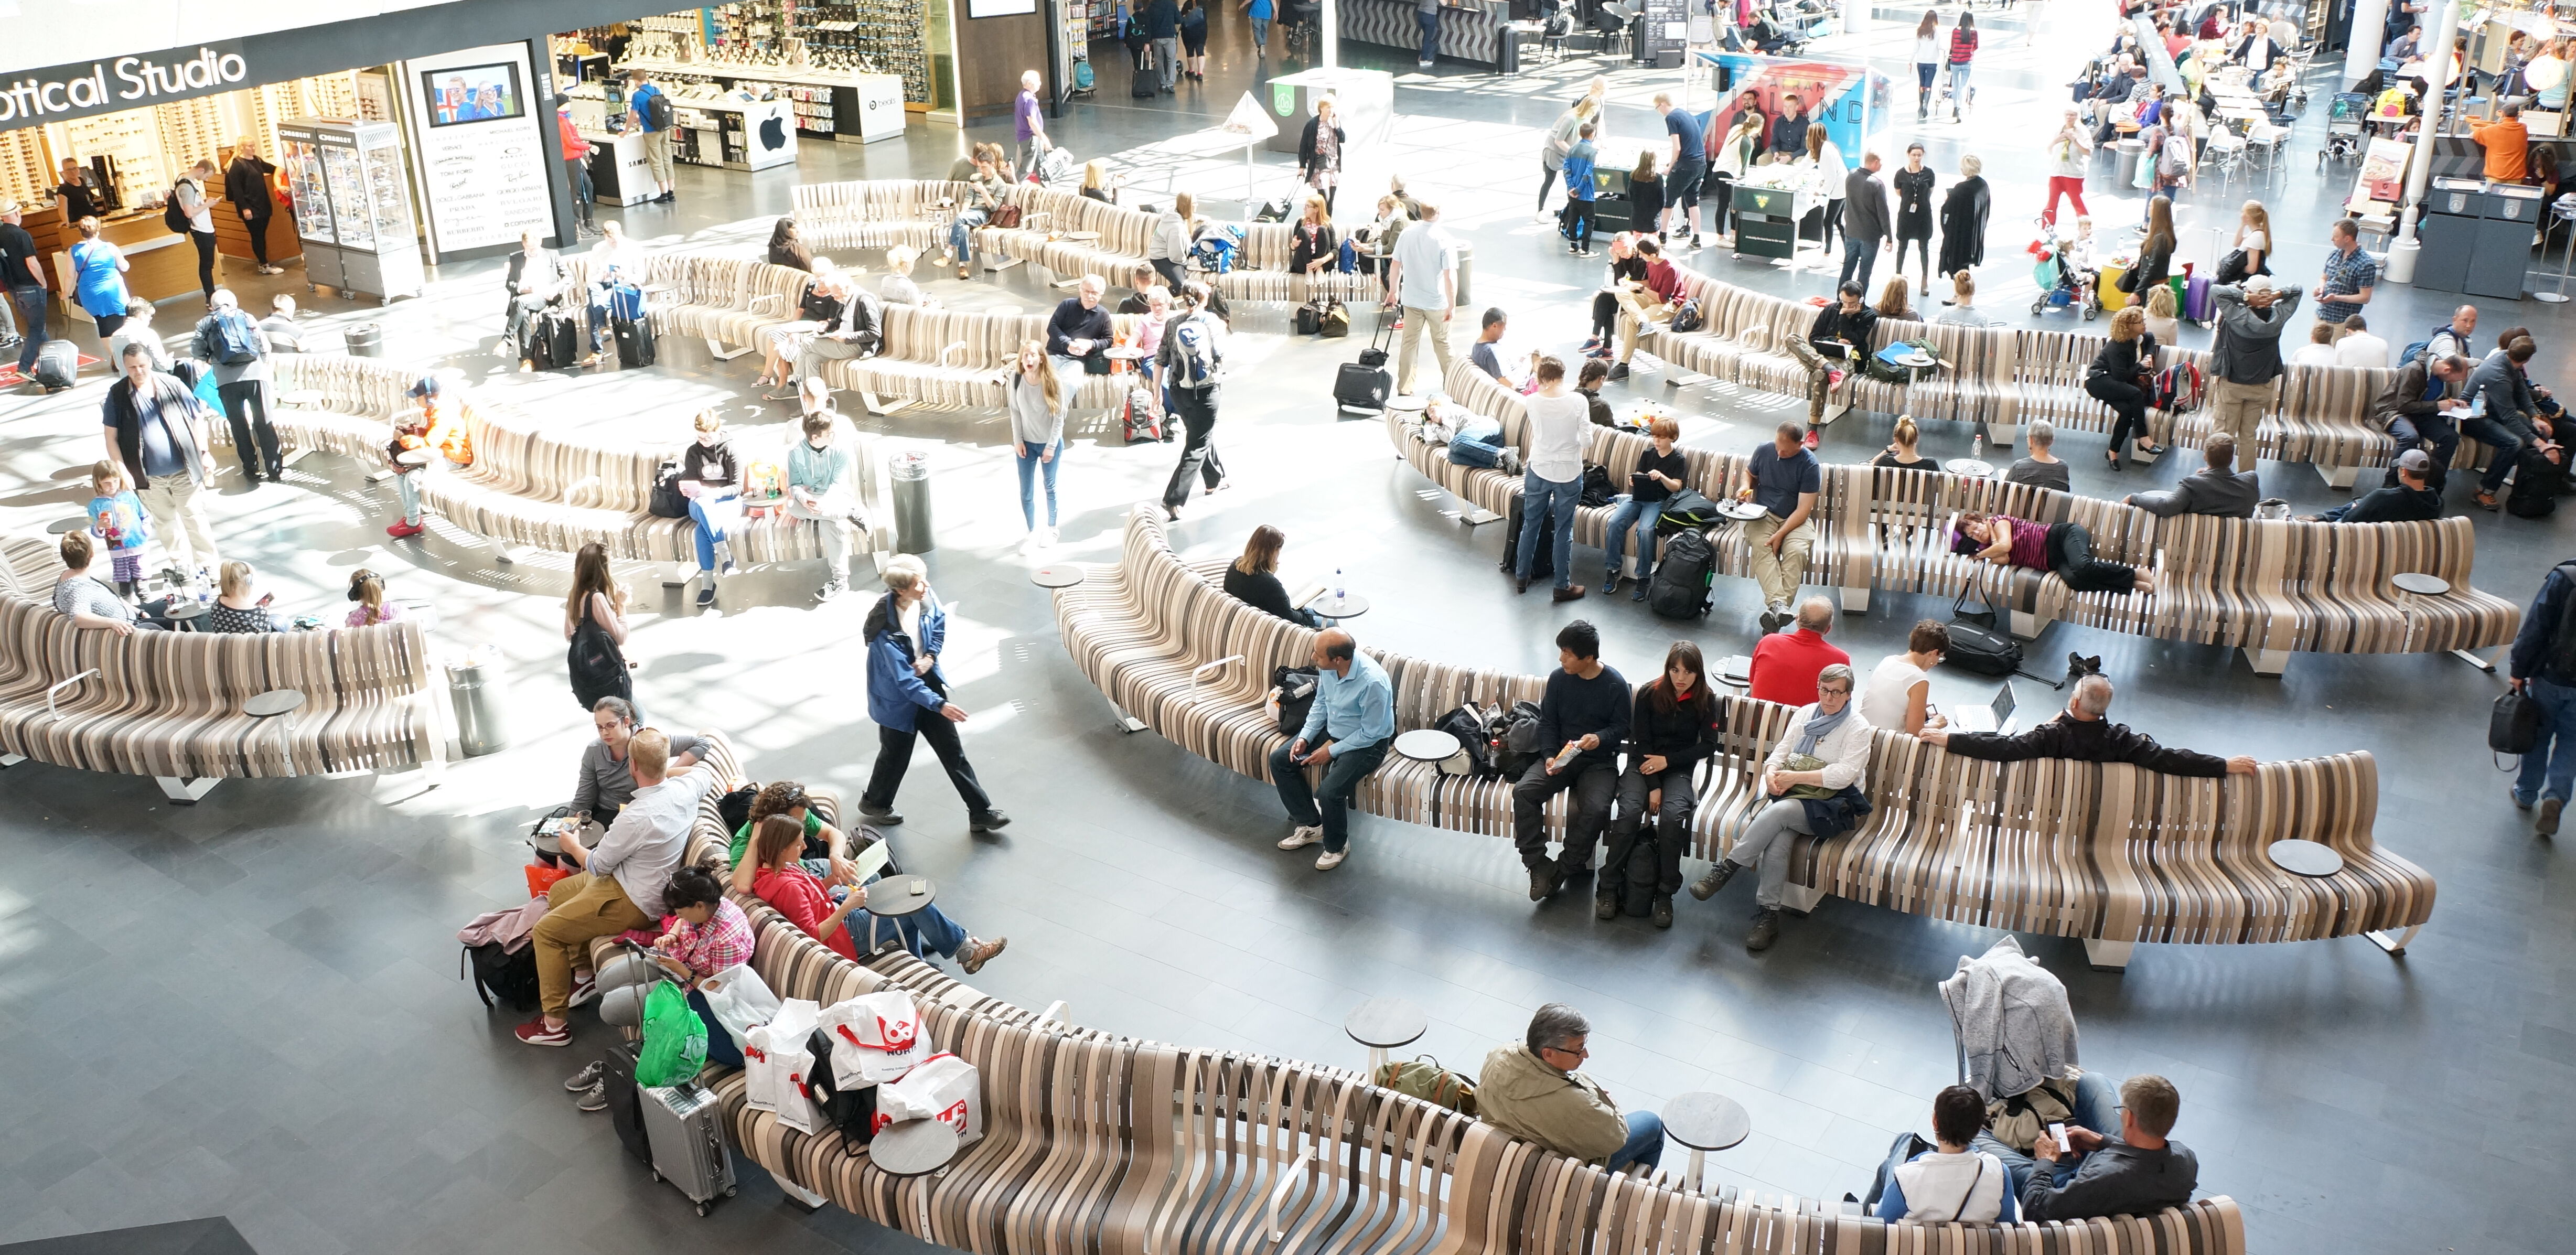 Nova C Series - Public Space Seating from Green Furniture